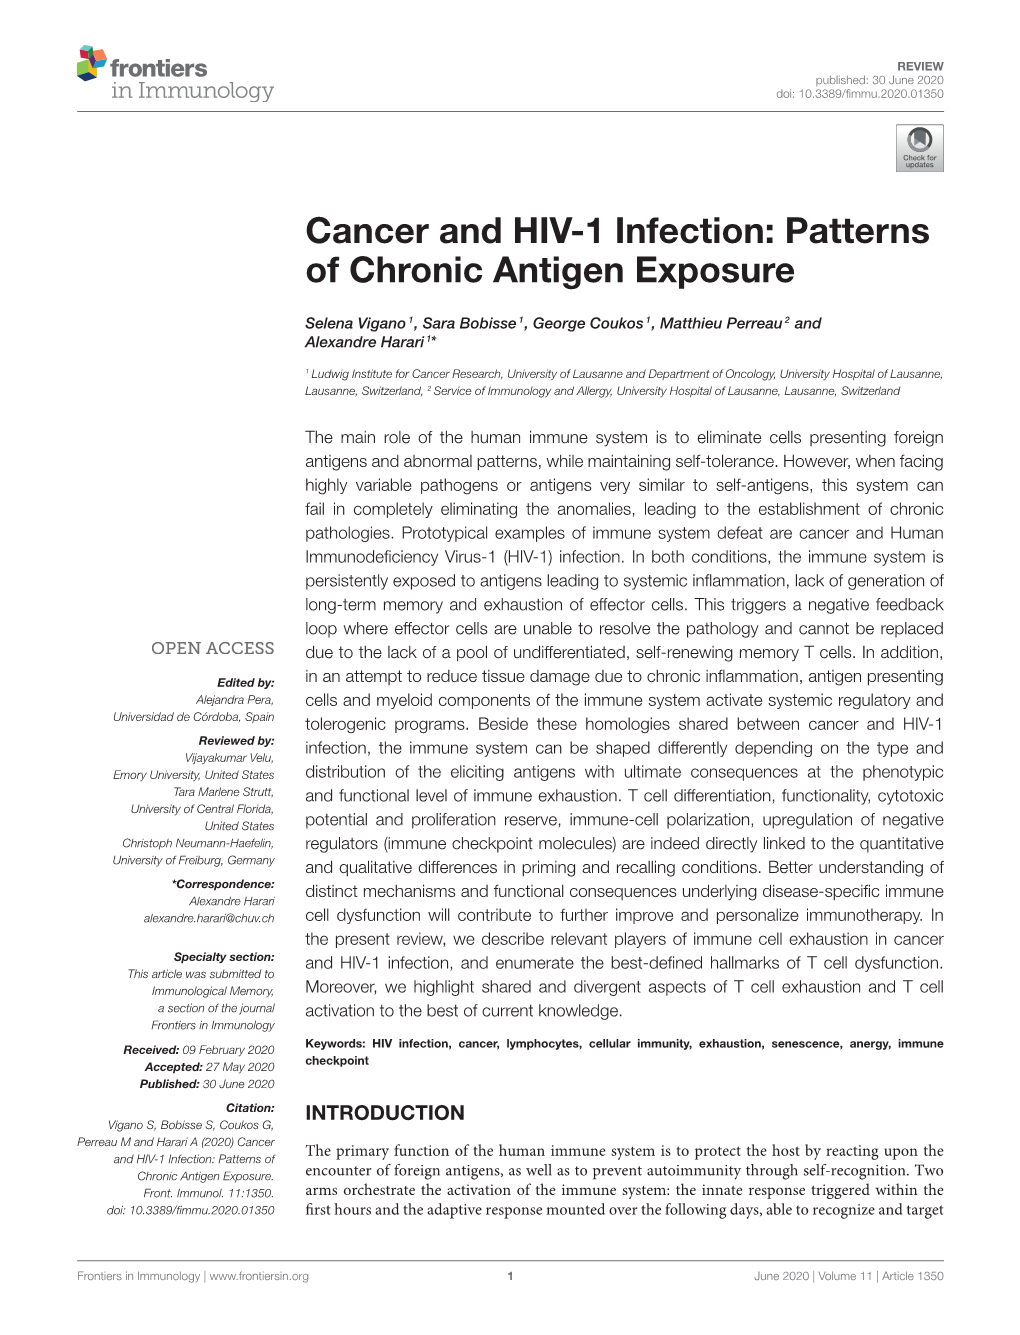 Cancer and HIV-1 Infection: Patterns of Chronic Antigen Exposure